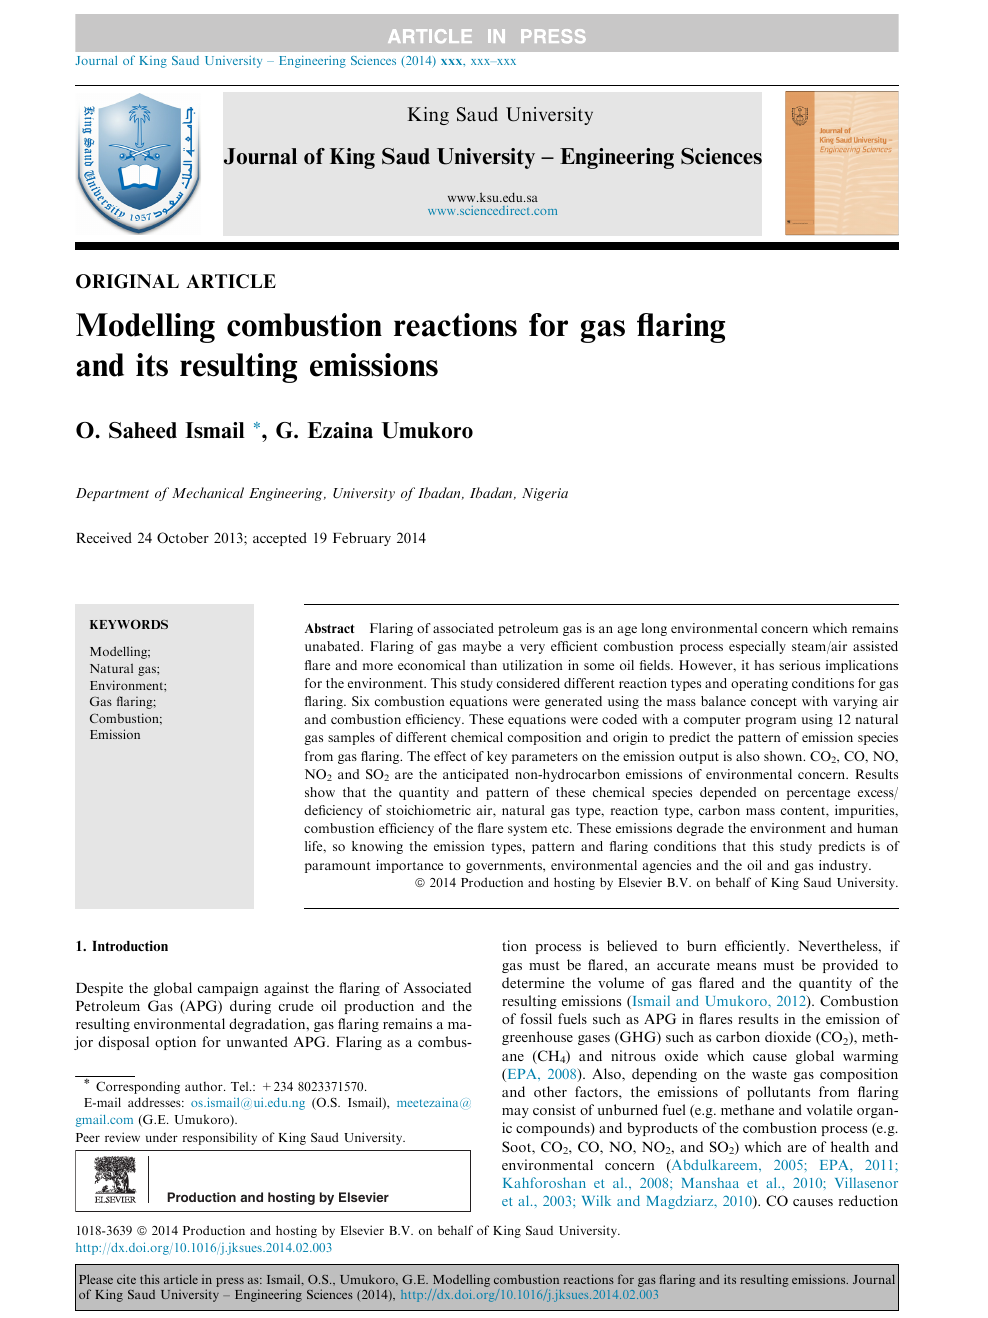 Modelling Combustion Reactions For Gas Flaring And Its Resulting Emissions Topic Of Research Paper In Earth And Related Environmental Sciences Download Scholarly Article Pdf And Read For Free On Cyberleninka Open